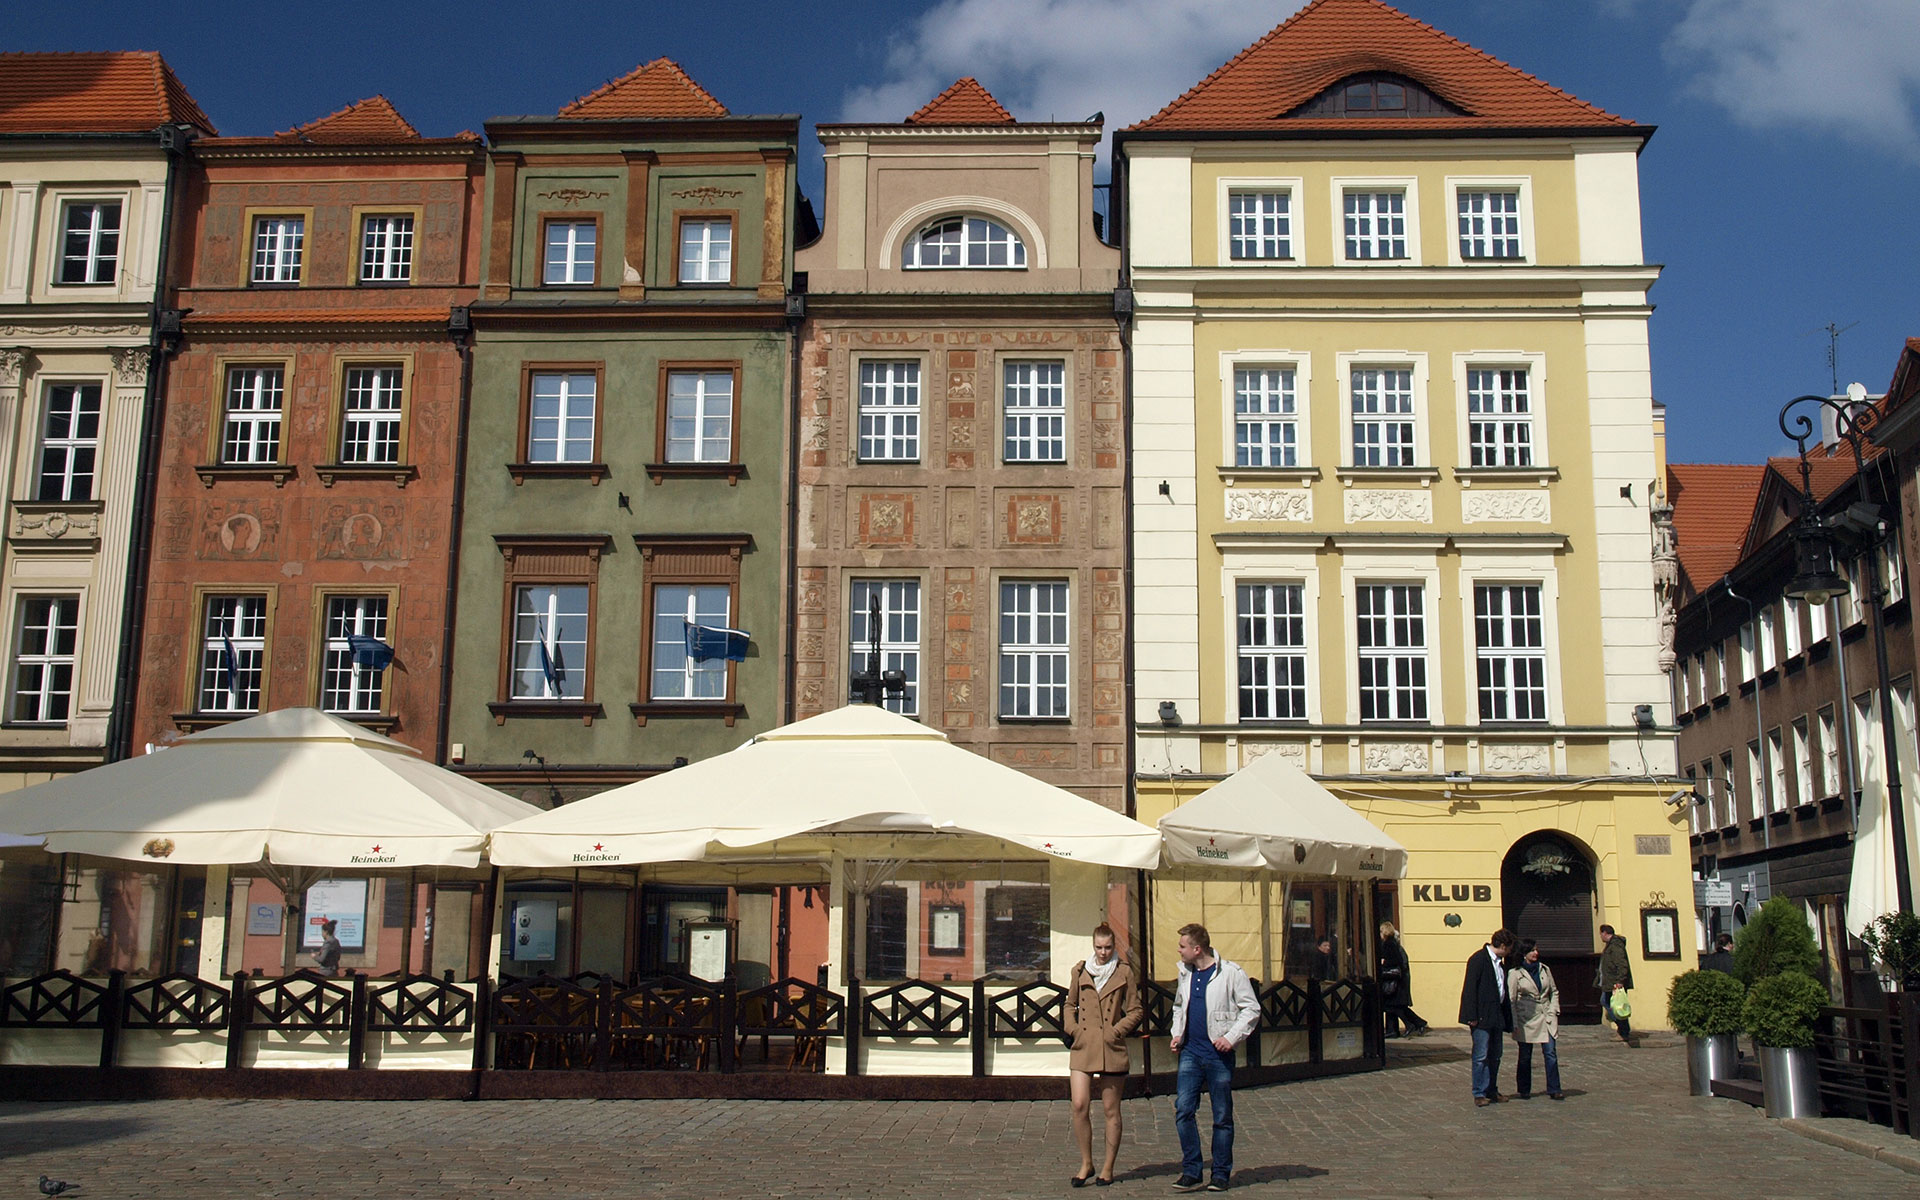 Colourful houses in Poznan's main square (photo © hidden europe).